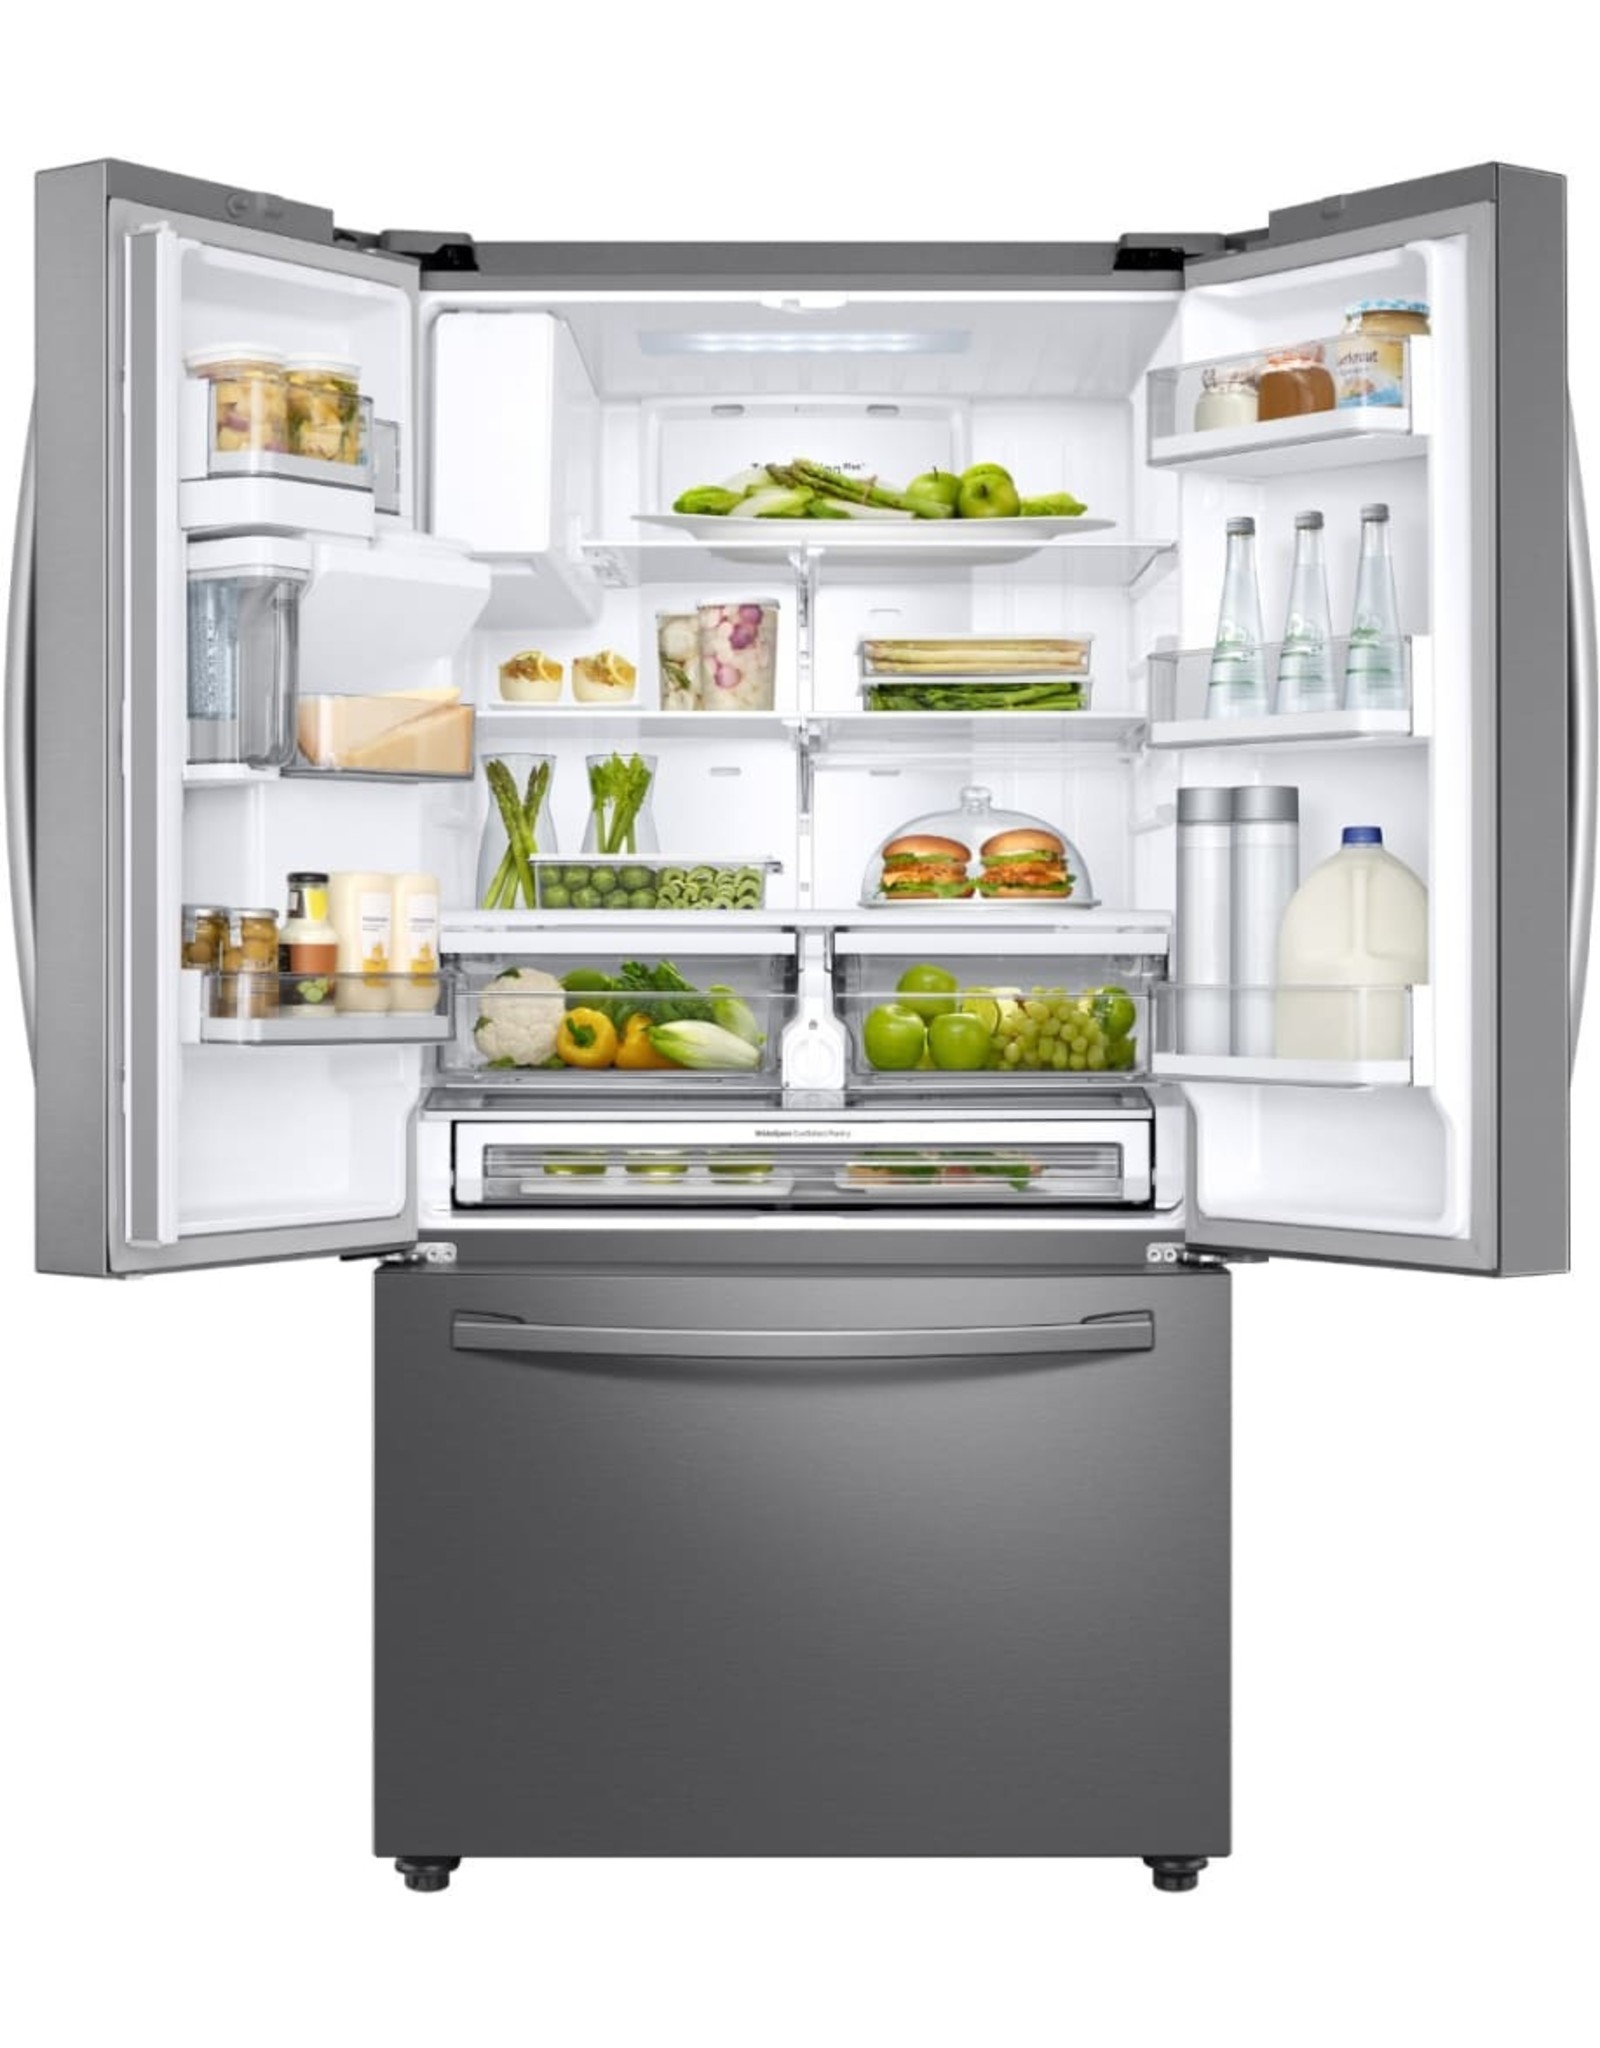 RF28R6221SR 28 cu. ft. 3-Door French Door Refrigerator in Stainless Steel with AutoFill Water Pitcher